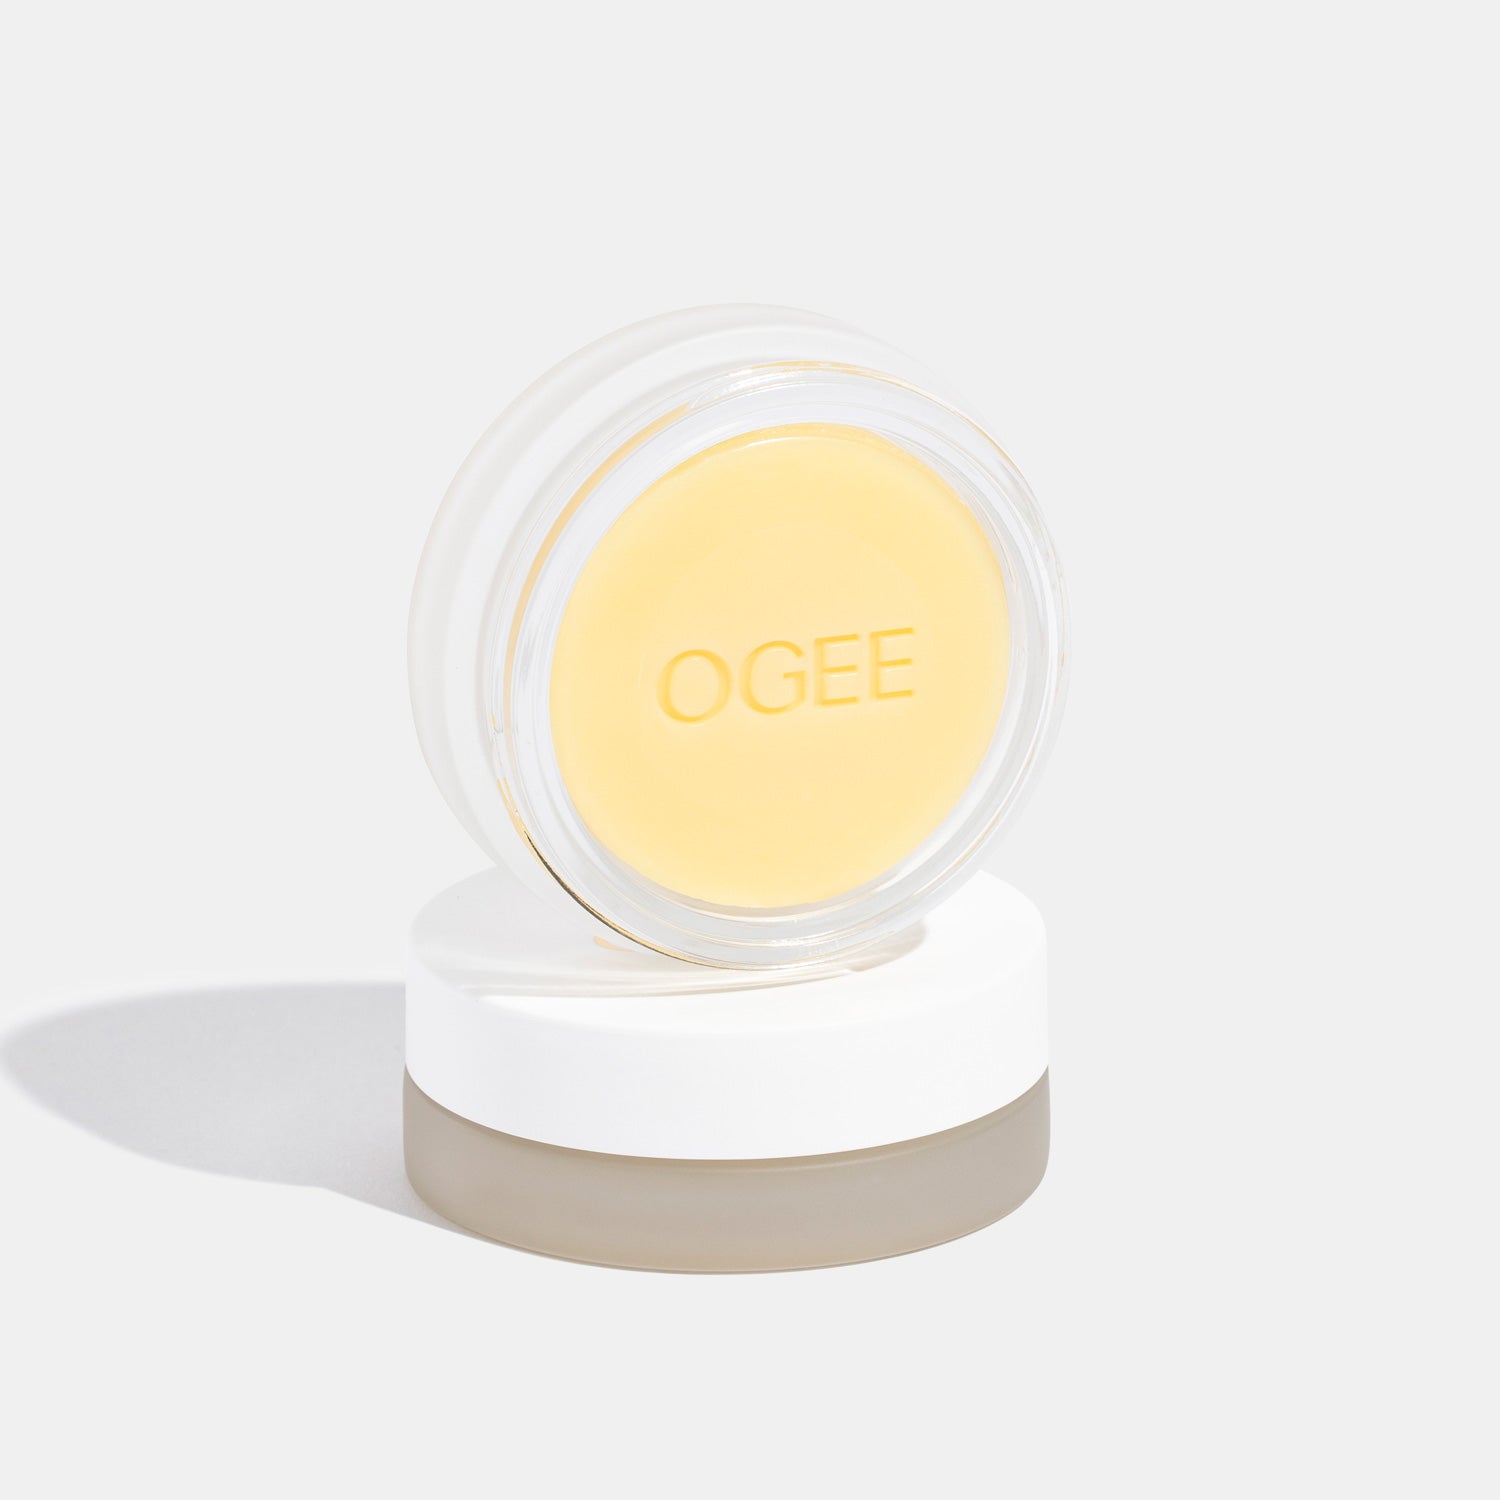 The Brush Cleanser – Ogee